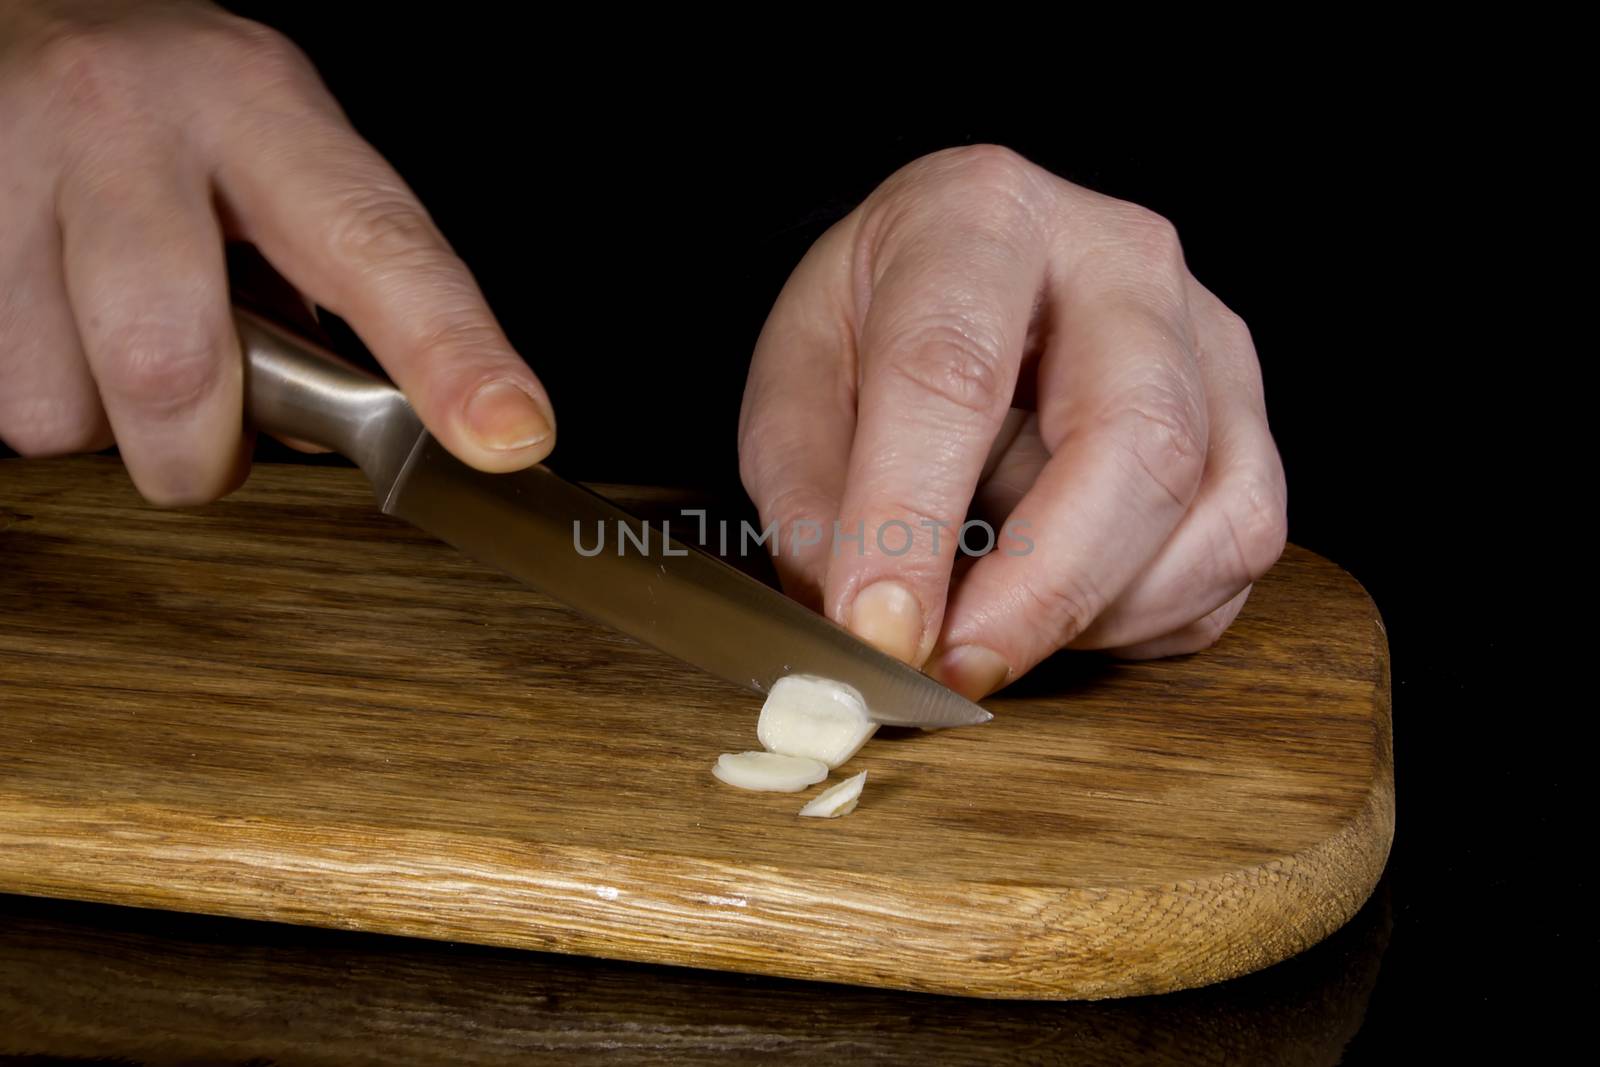 Woman chopping garlic with a knife on a wooden board